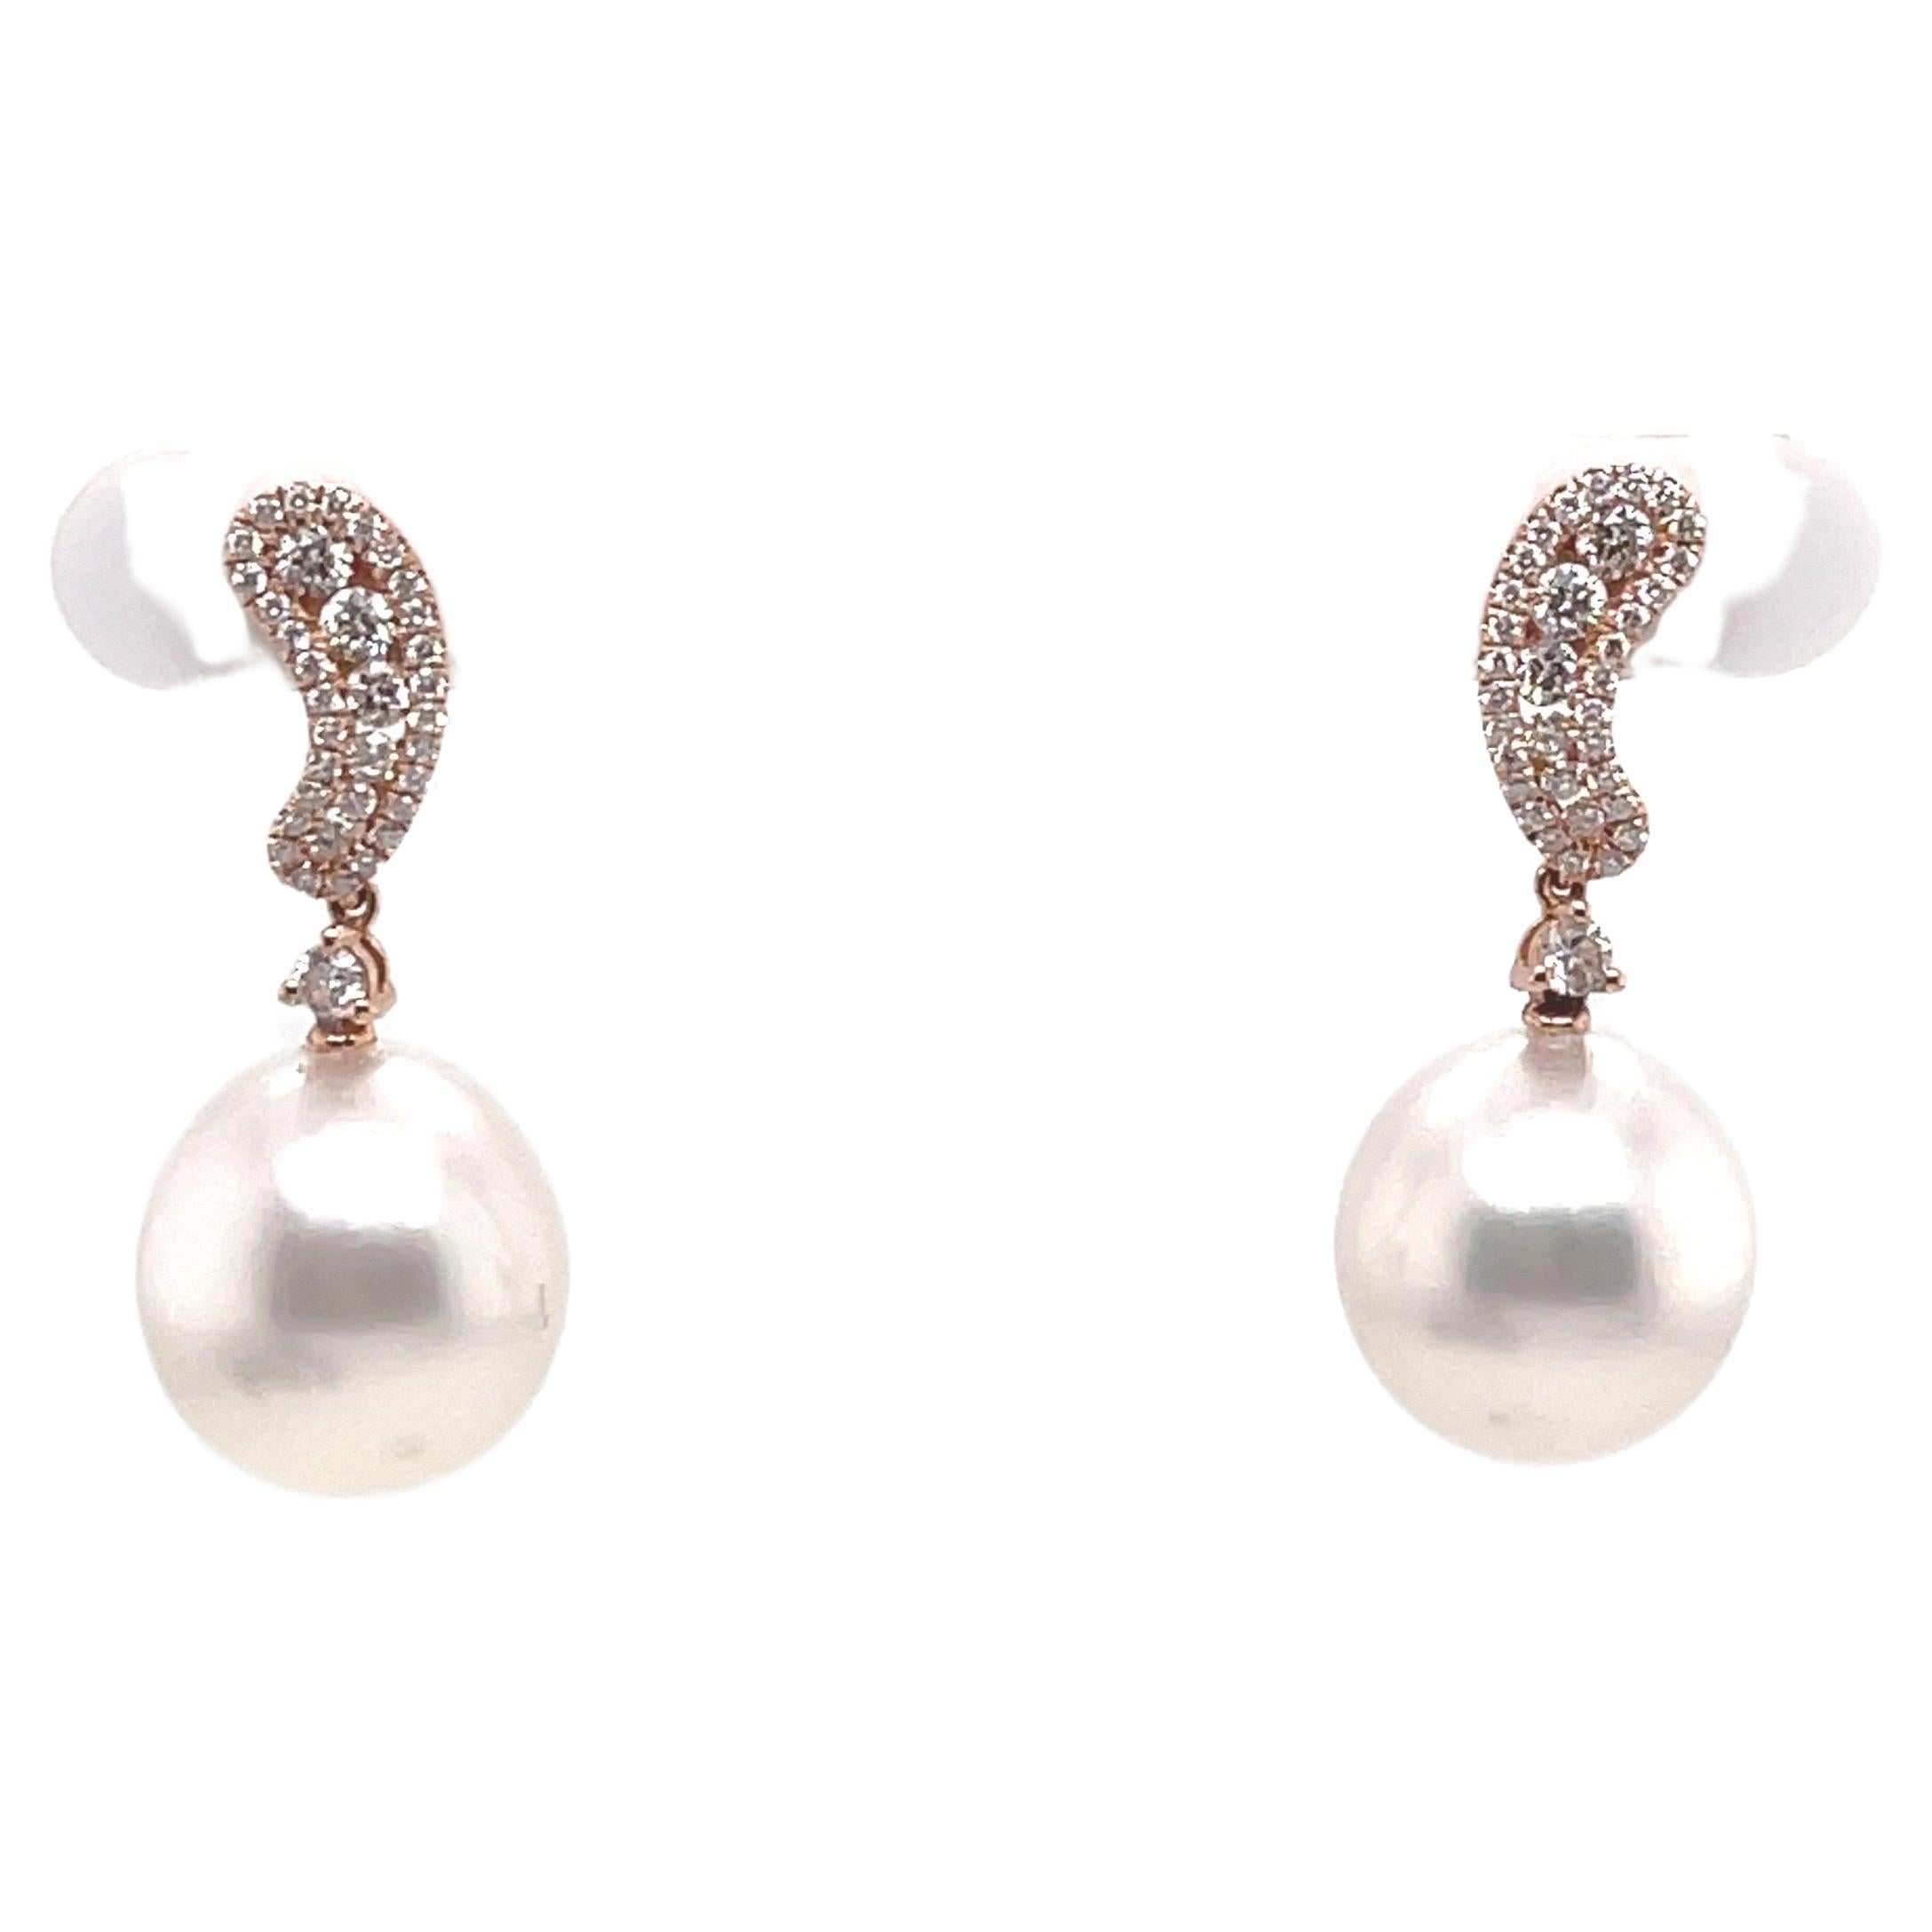 18 Karat rose gold drop earrings featuring two South Sea Pearls measuring 12-13 mm with 8 round brilliants, 0.31 carats and 62 smaller diamonds weighing 0.29 carats. 